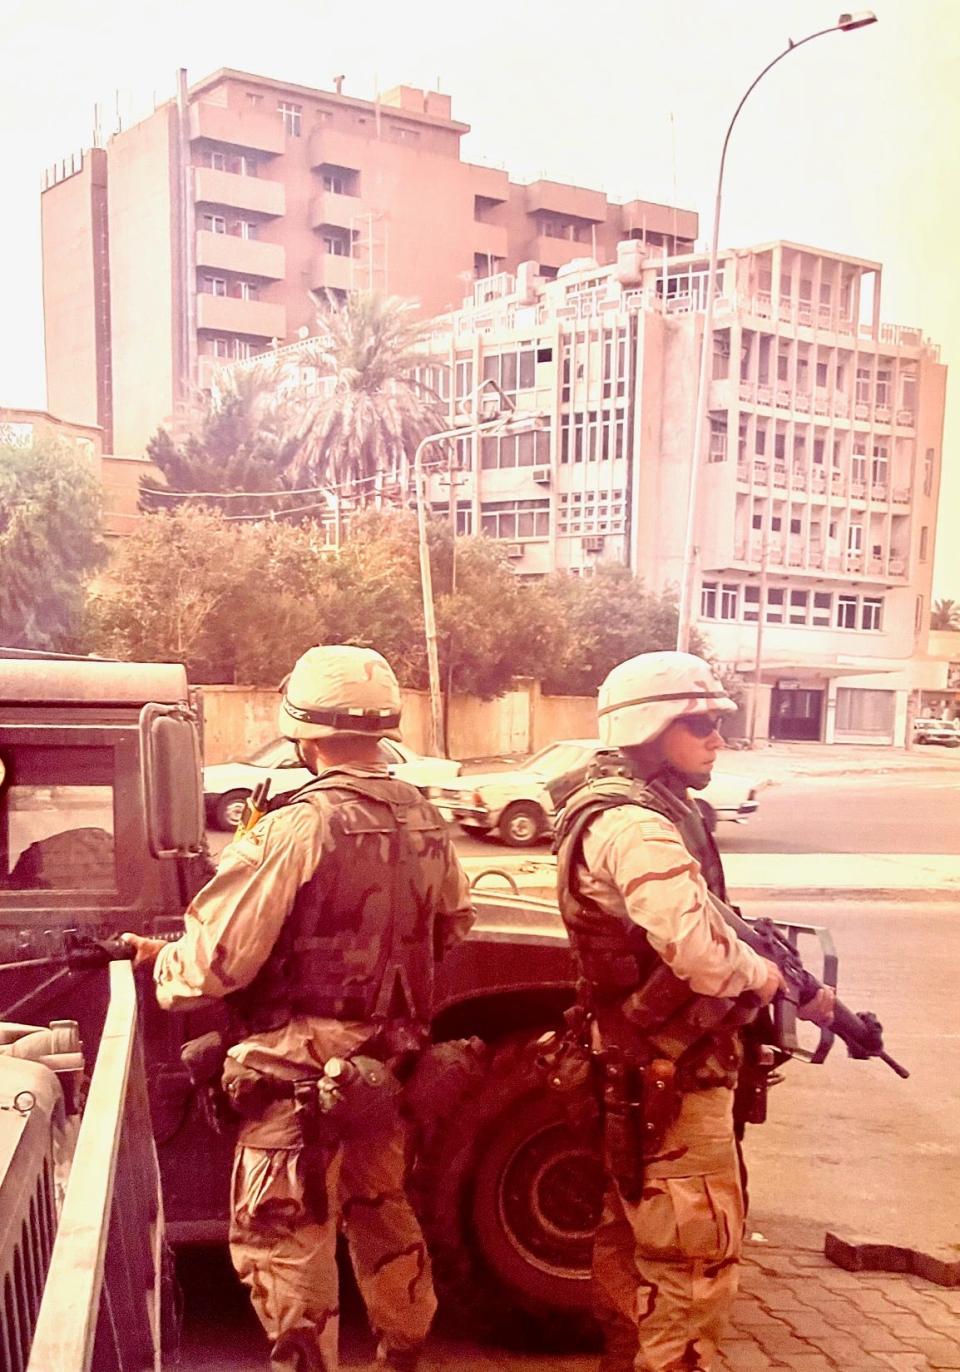 Scott Spitnale, right, during his U.S. Special Forces tour in Baghdad from 2003-2004.